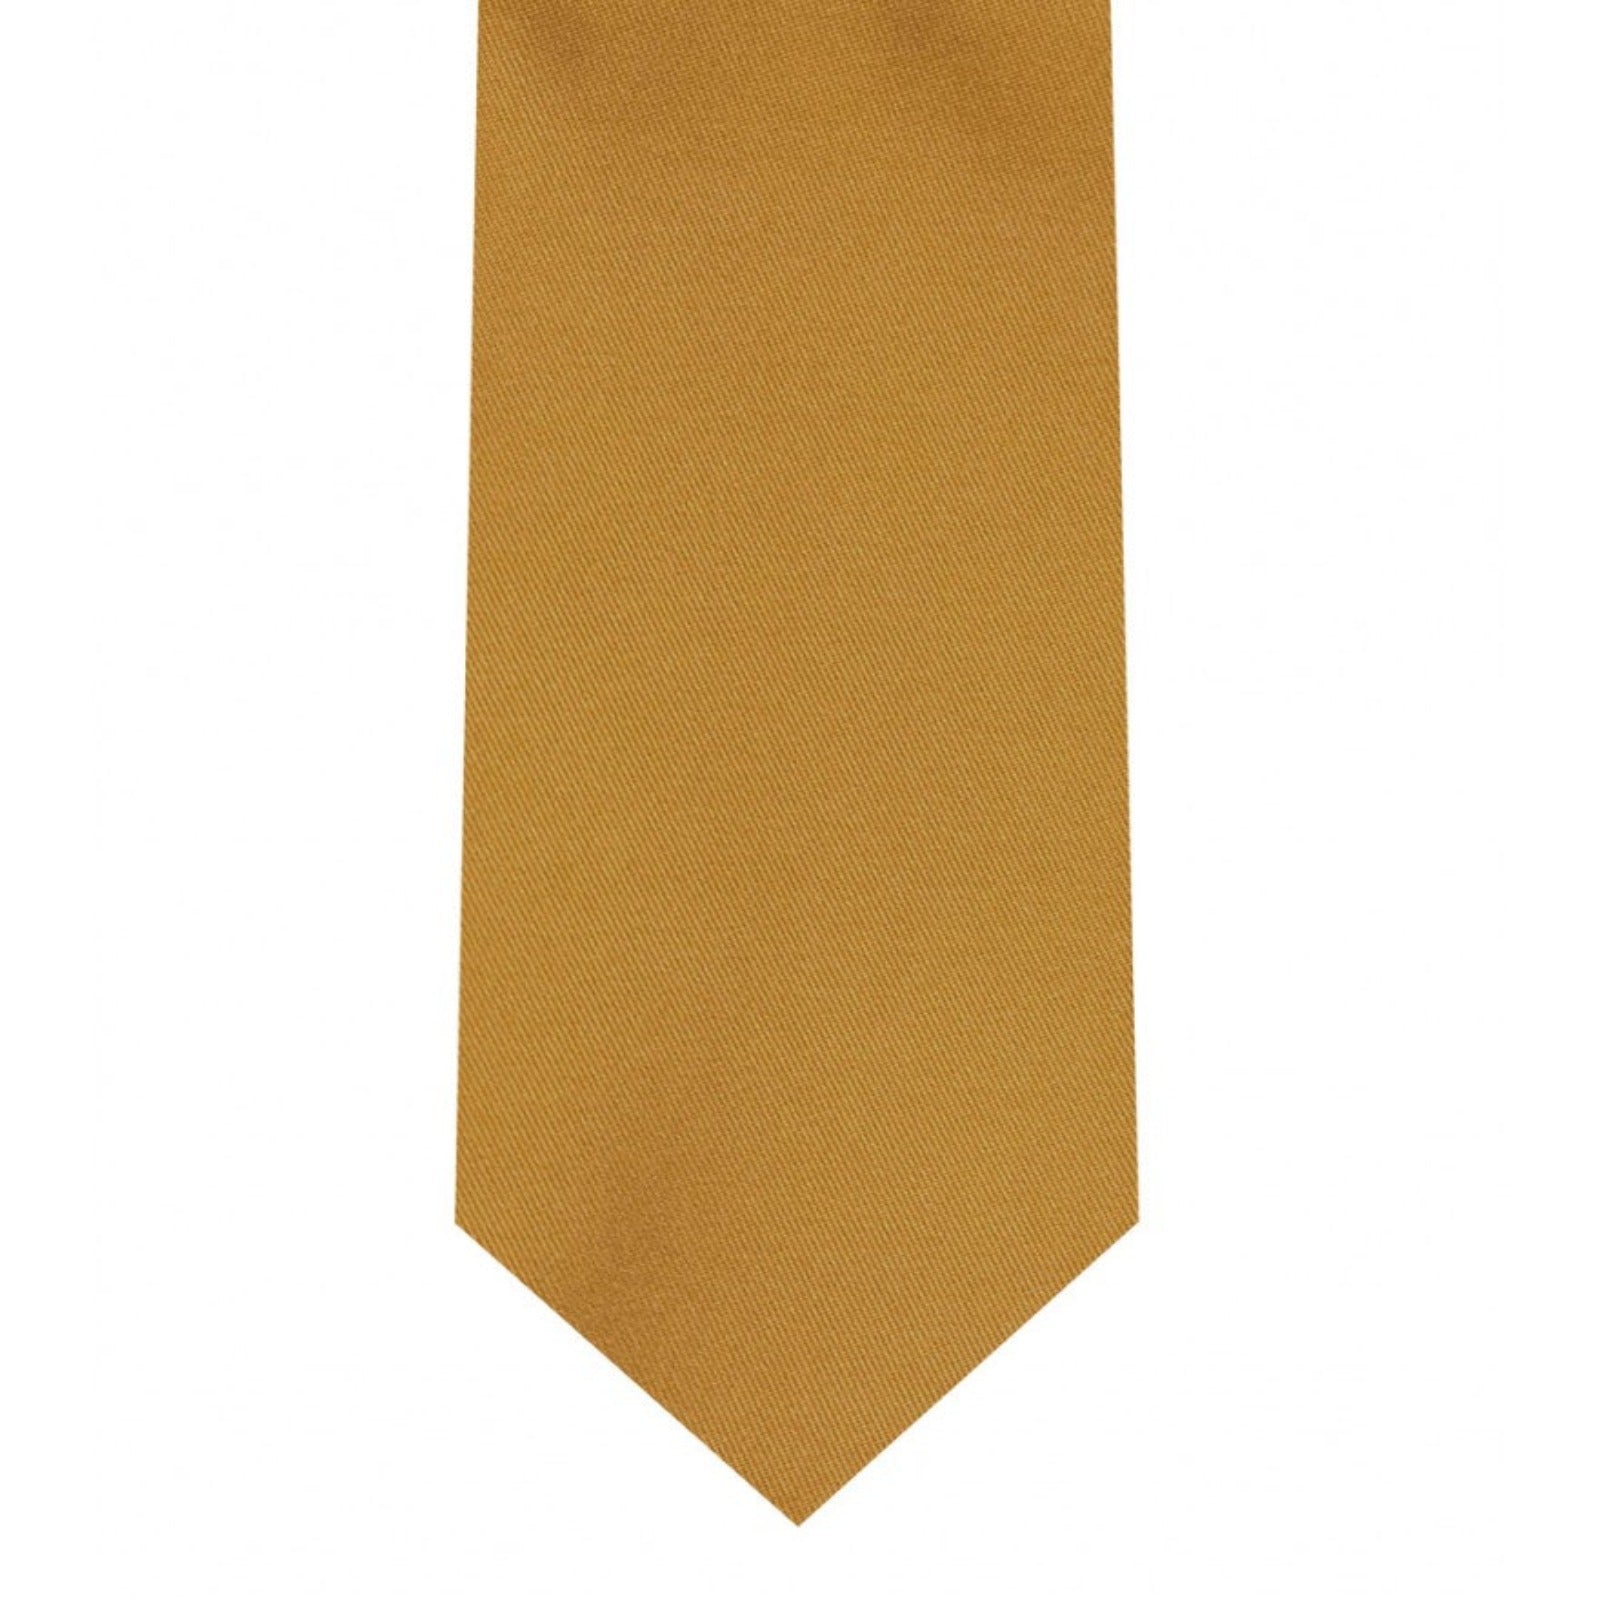 Classic Rust Tie Skinny width 2.75 inches With Matching Pocket Square | KCT Menswear